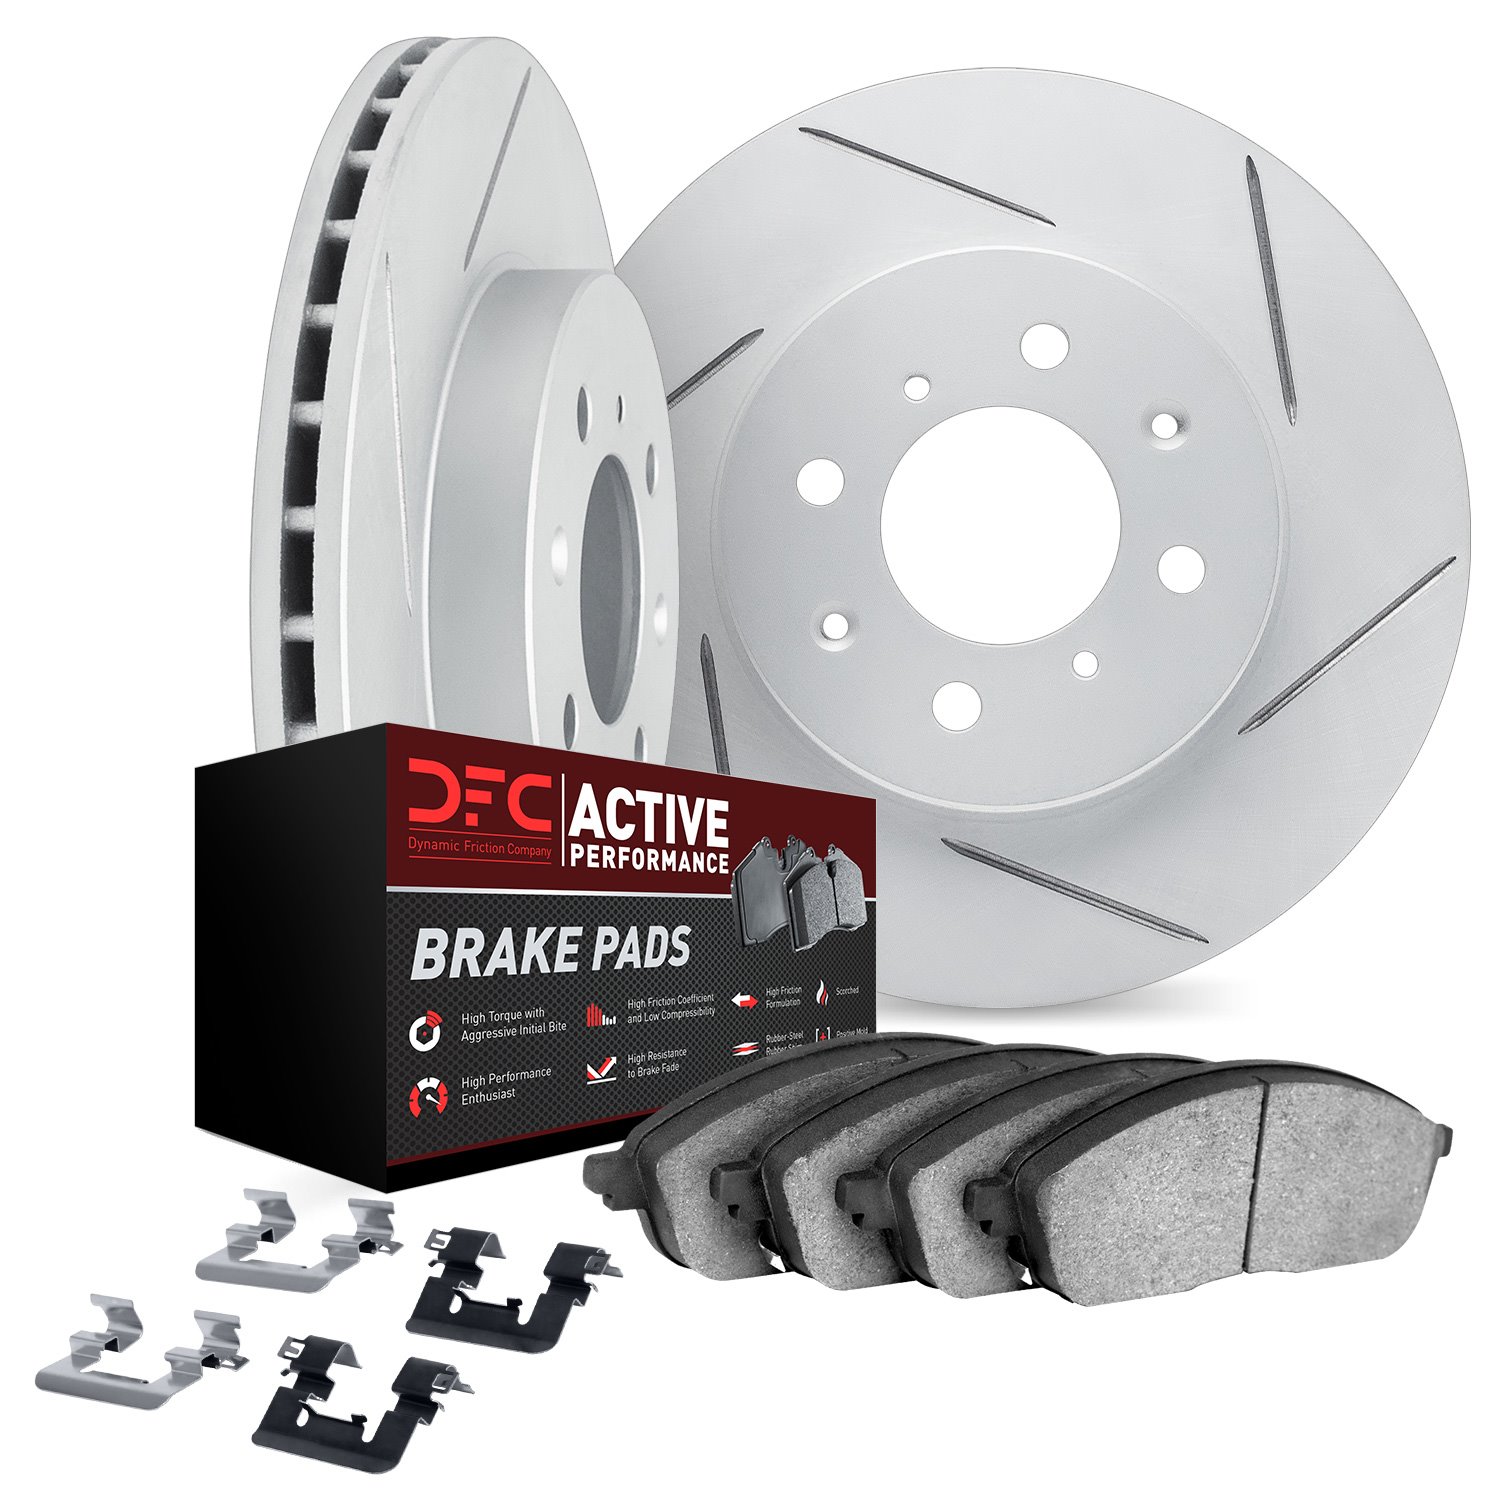 2712-80054 Geoperformance Slotted Brake Rotors with Active Performance Pads Kits & Hardware, Fits Select Multiple Makes/Models,